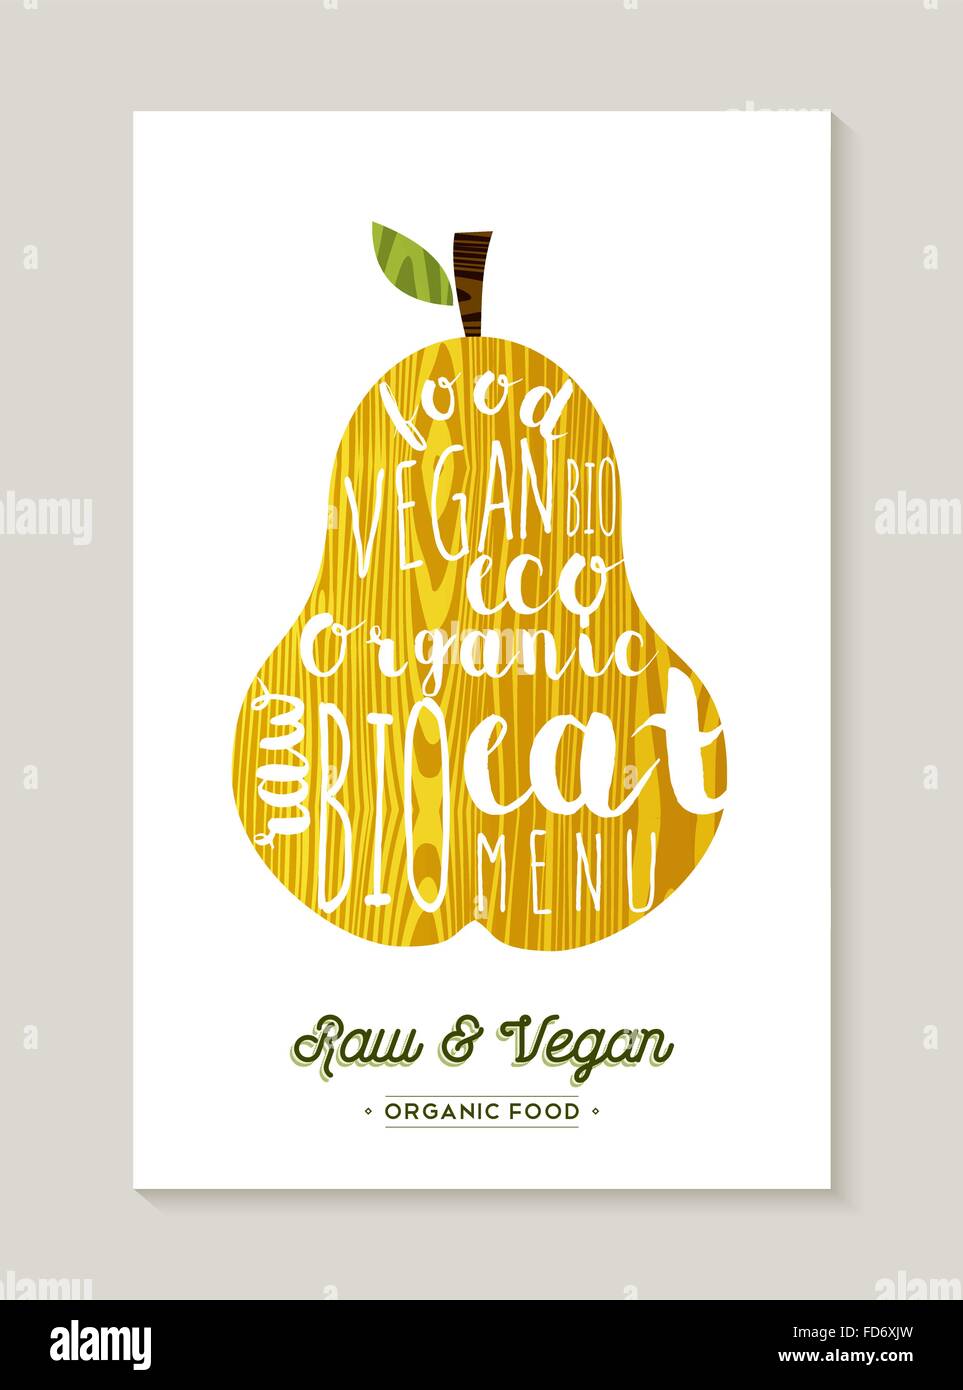 Organic pear concept retro illustration design with vegan and vegetarian food themed text. EPS10 vector. Stock Vector